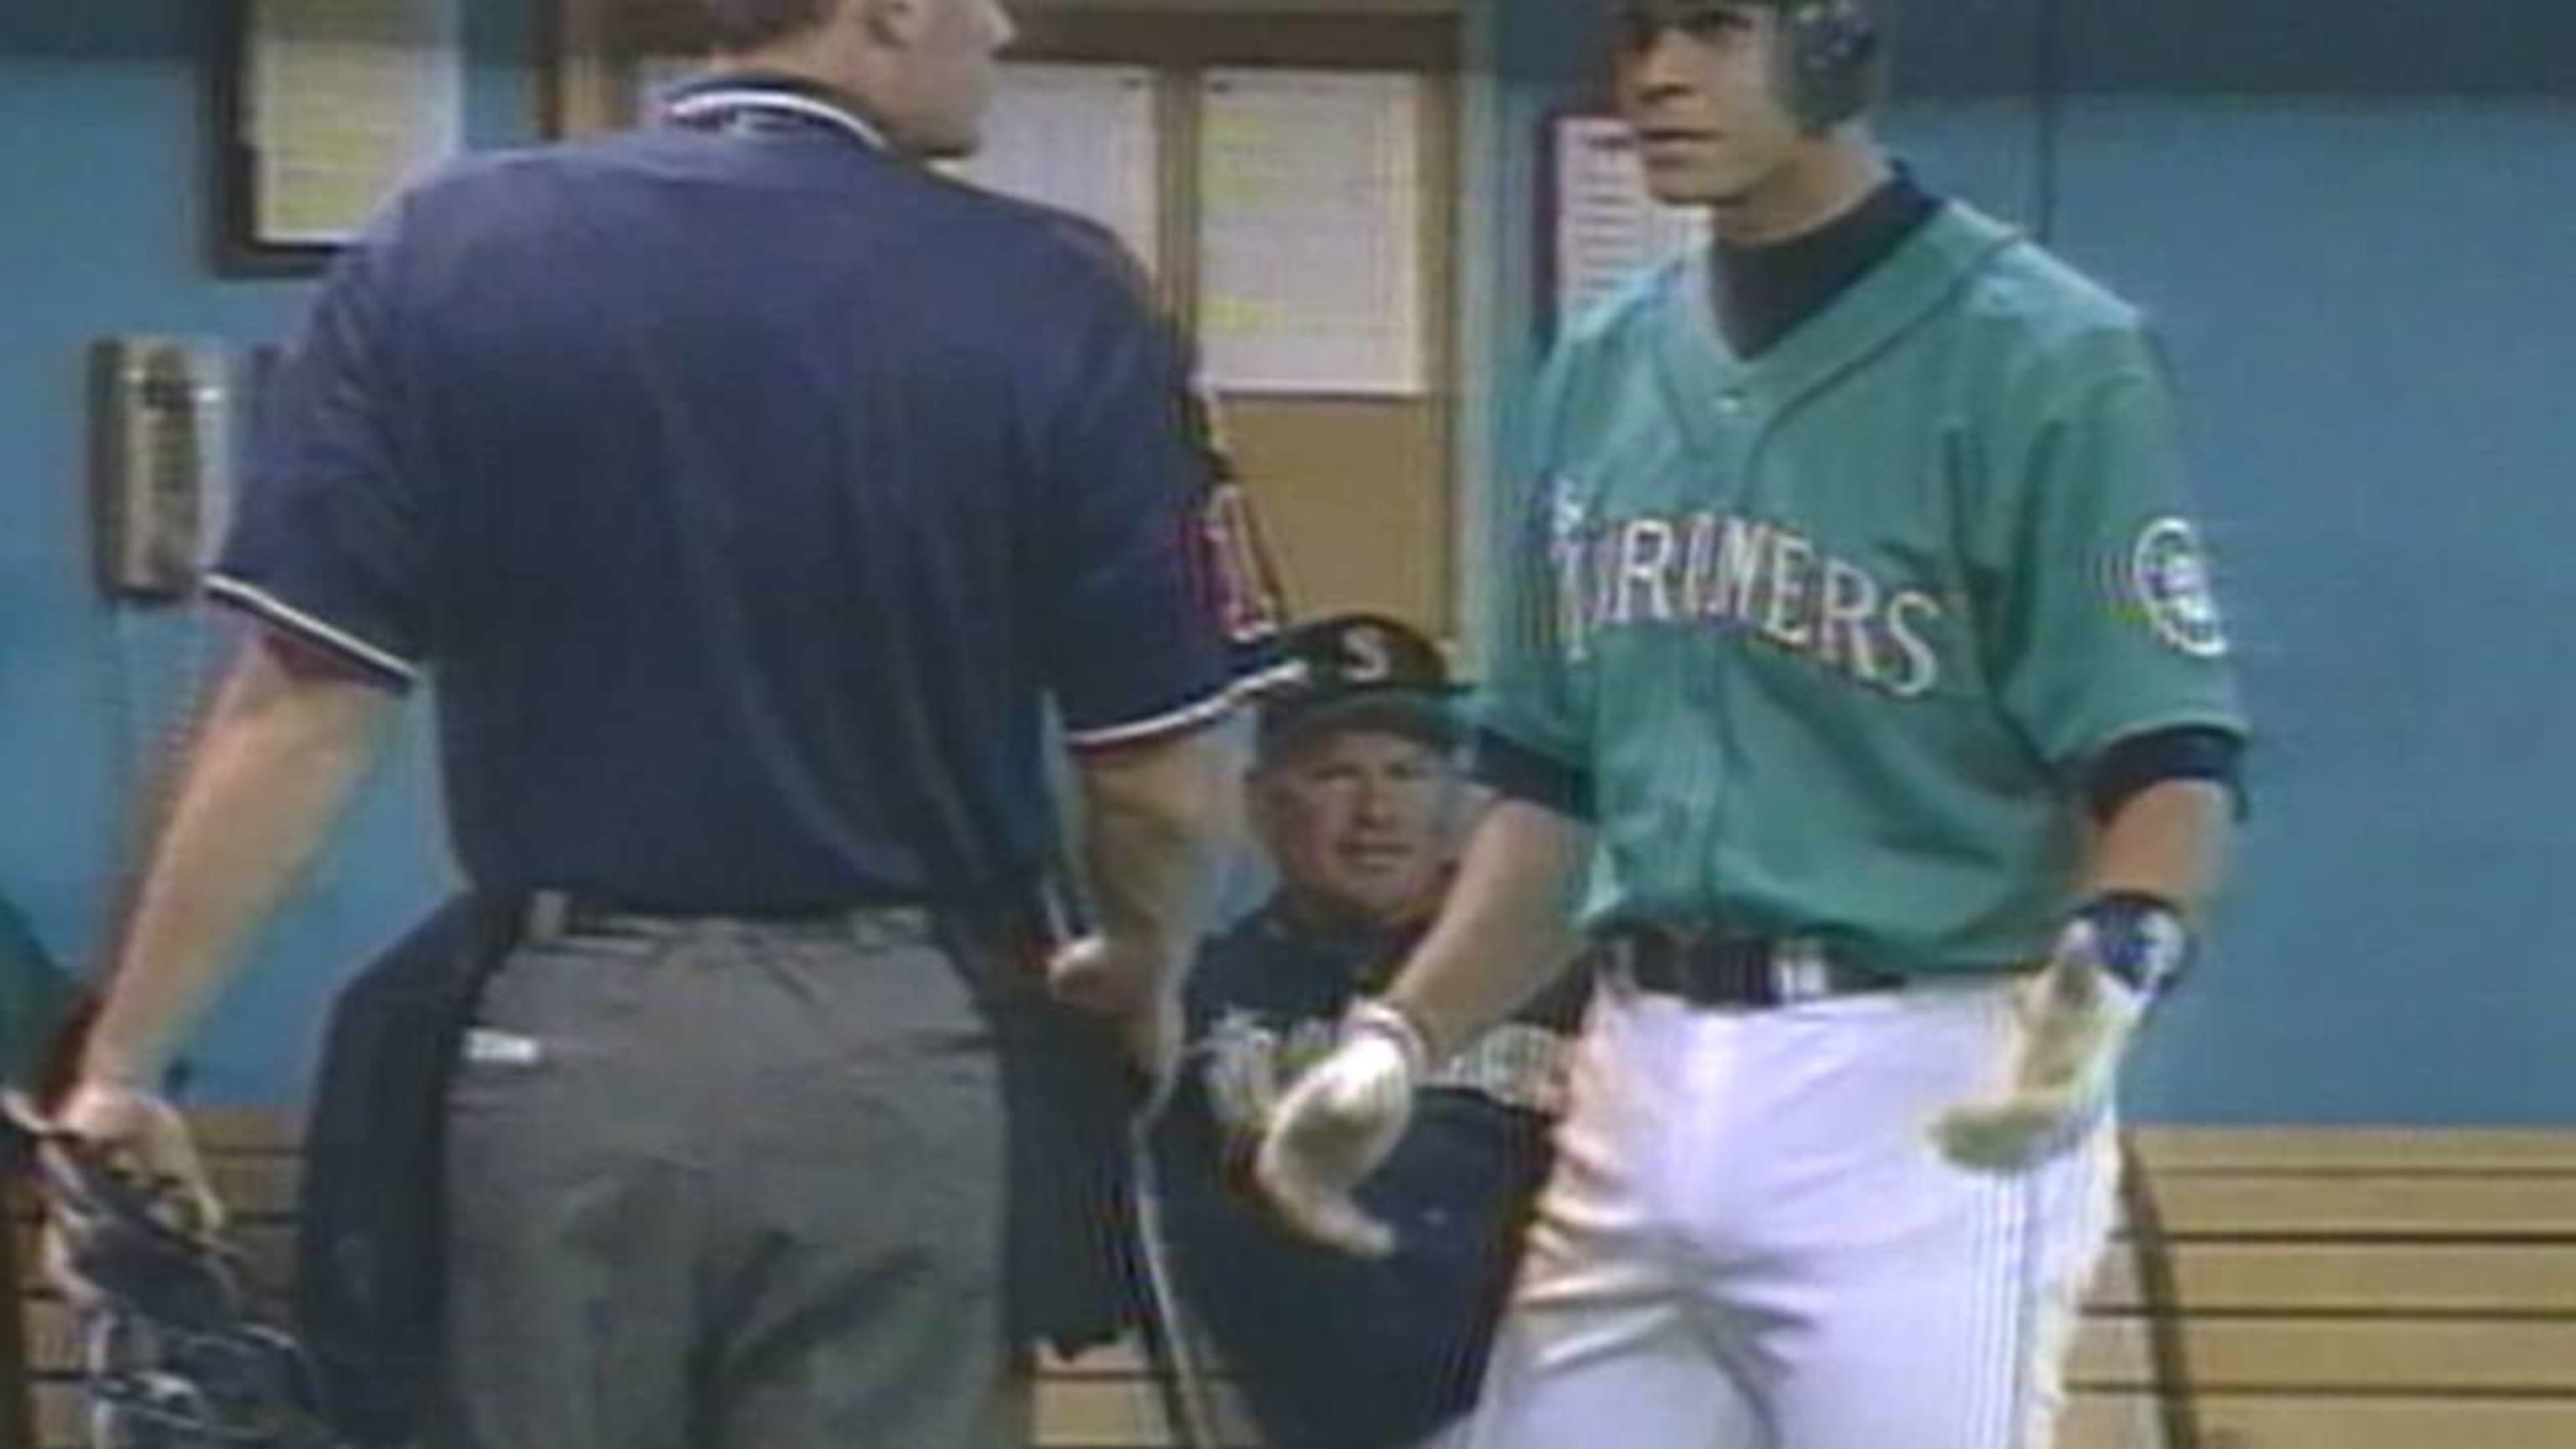 A-Rod homers with Griffey's bat